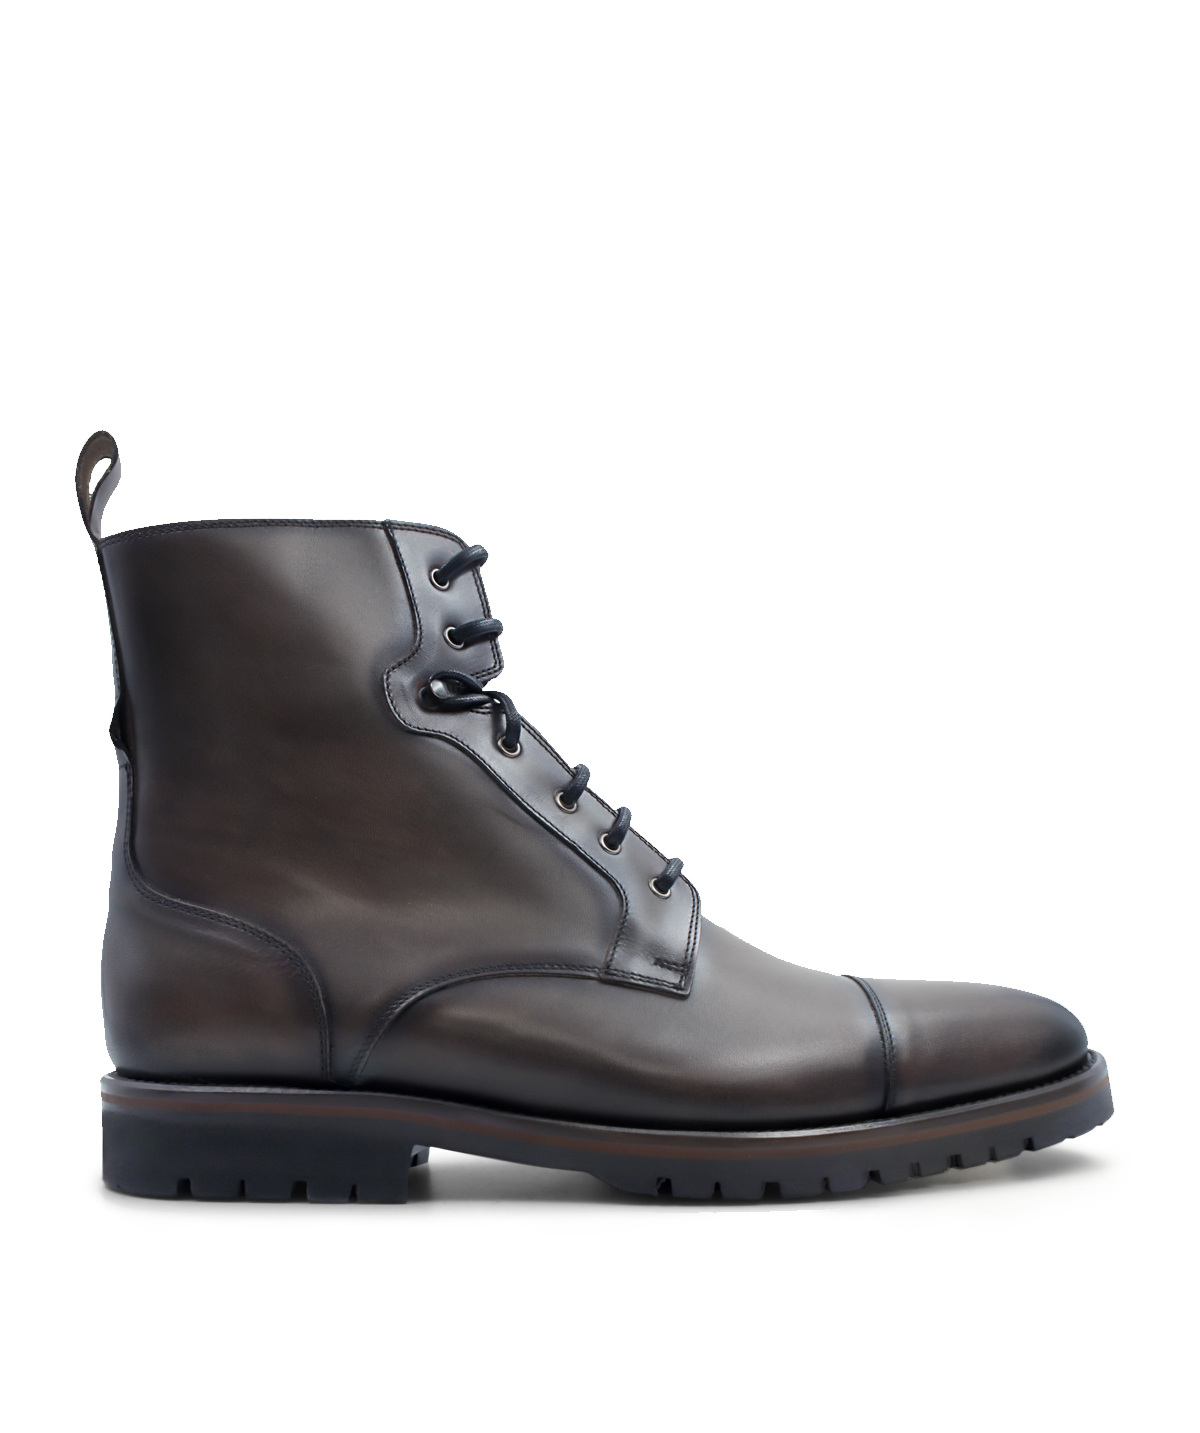 POWELL Grey patinated leather boots for men.